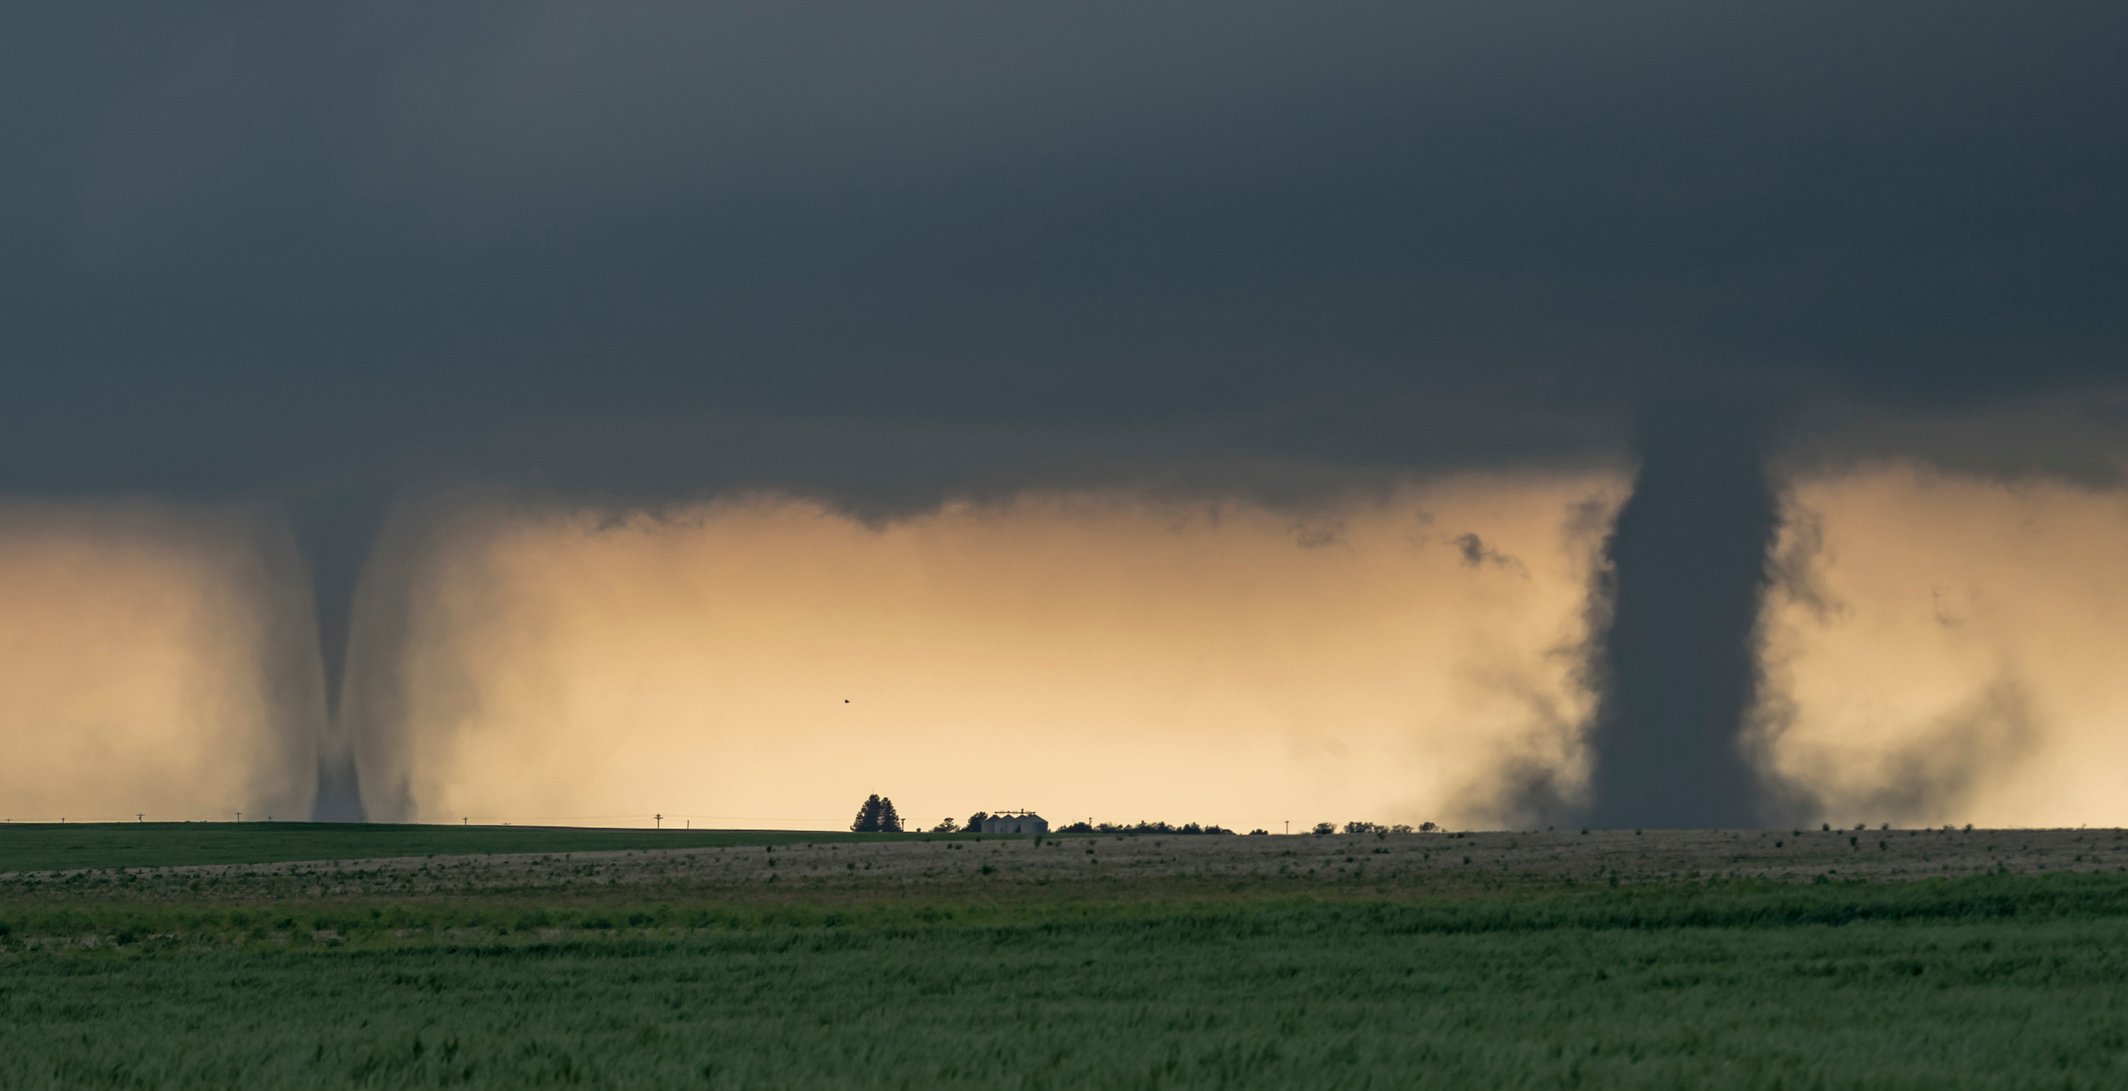 Unraveling Tornadoes: The different types that spawn in the U.S.